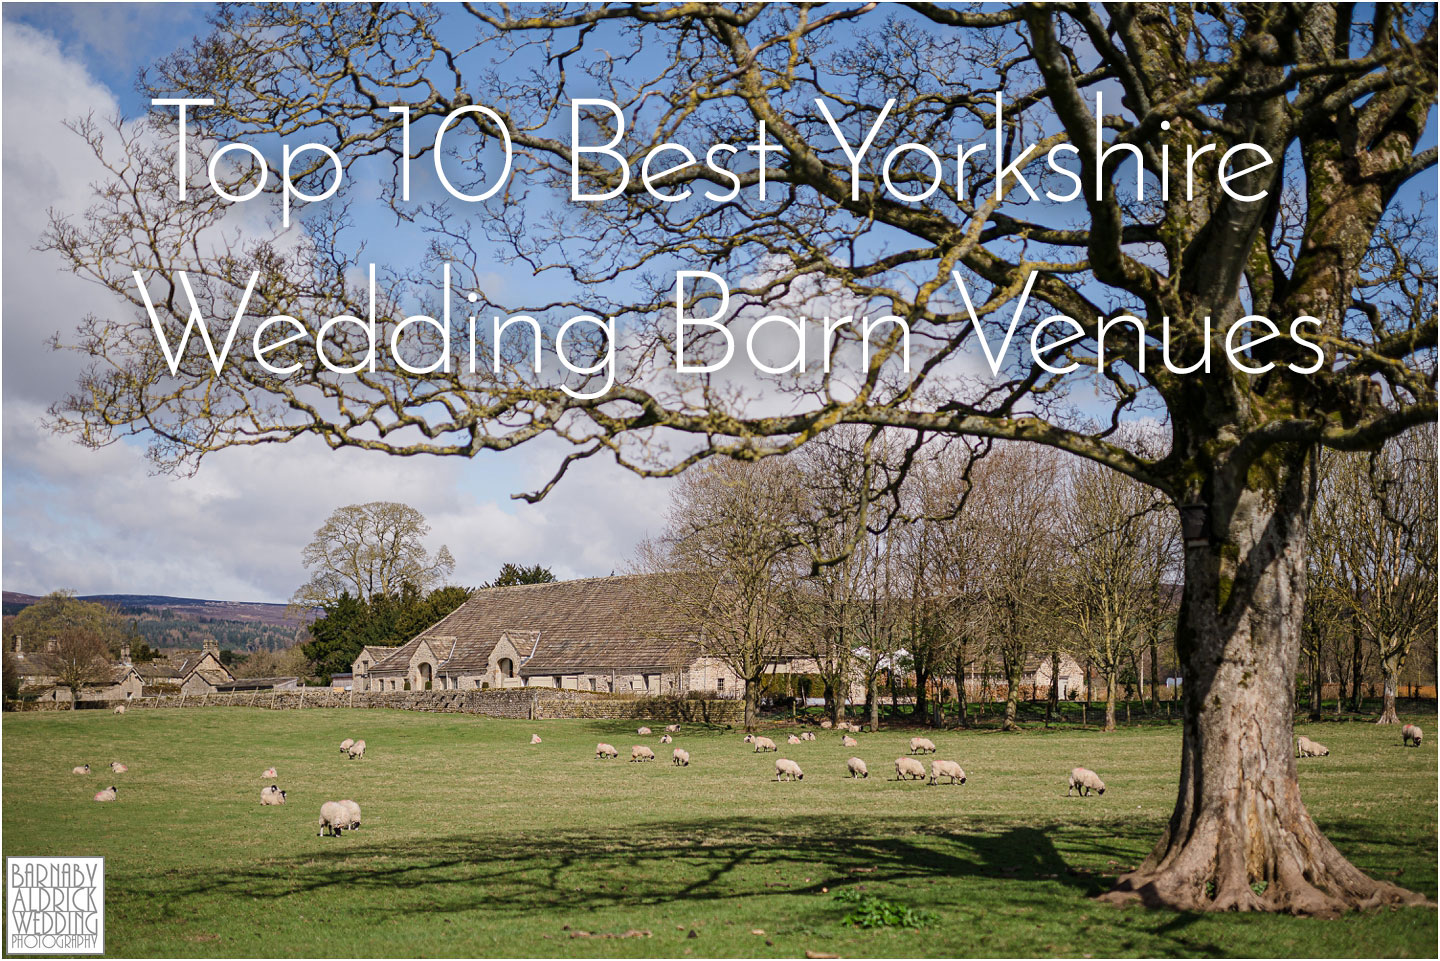 Top 15 Best Yorkshire Stately Home Wedding Venues, Top 10 Best Yorkshire Wedding Barn Venues, Best Yorkshire Wedding Barns, UK Best Wedding Barns